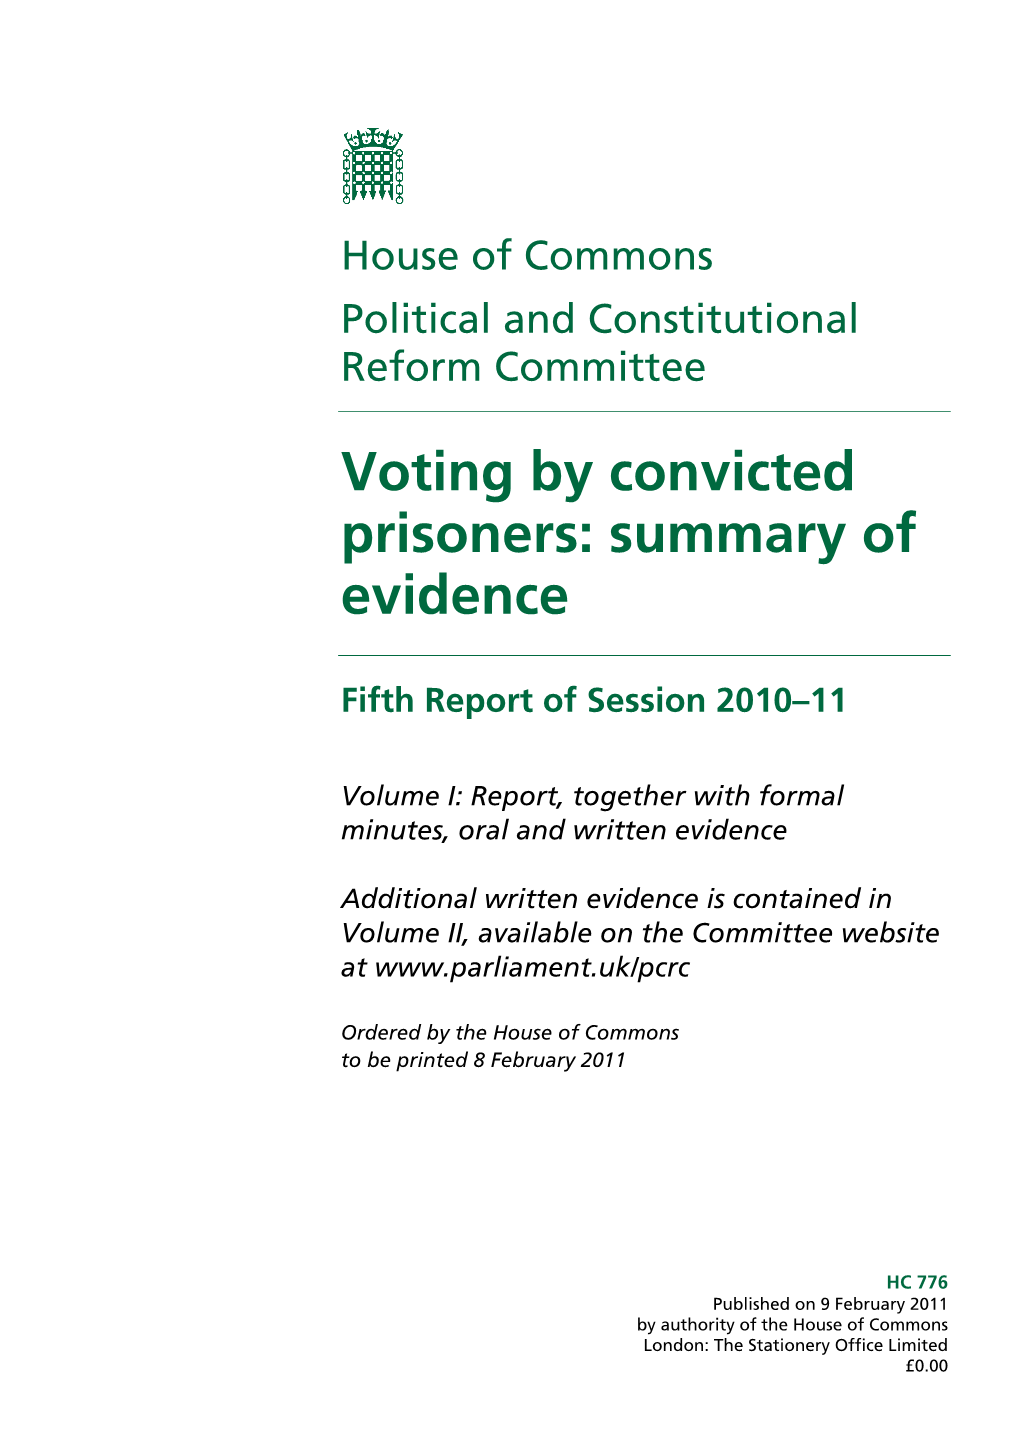 Voting by Convicted Prisoners: Summary of Evidence